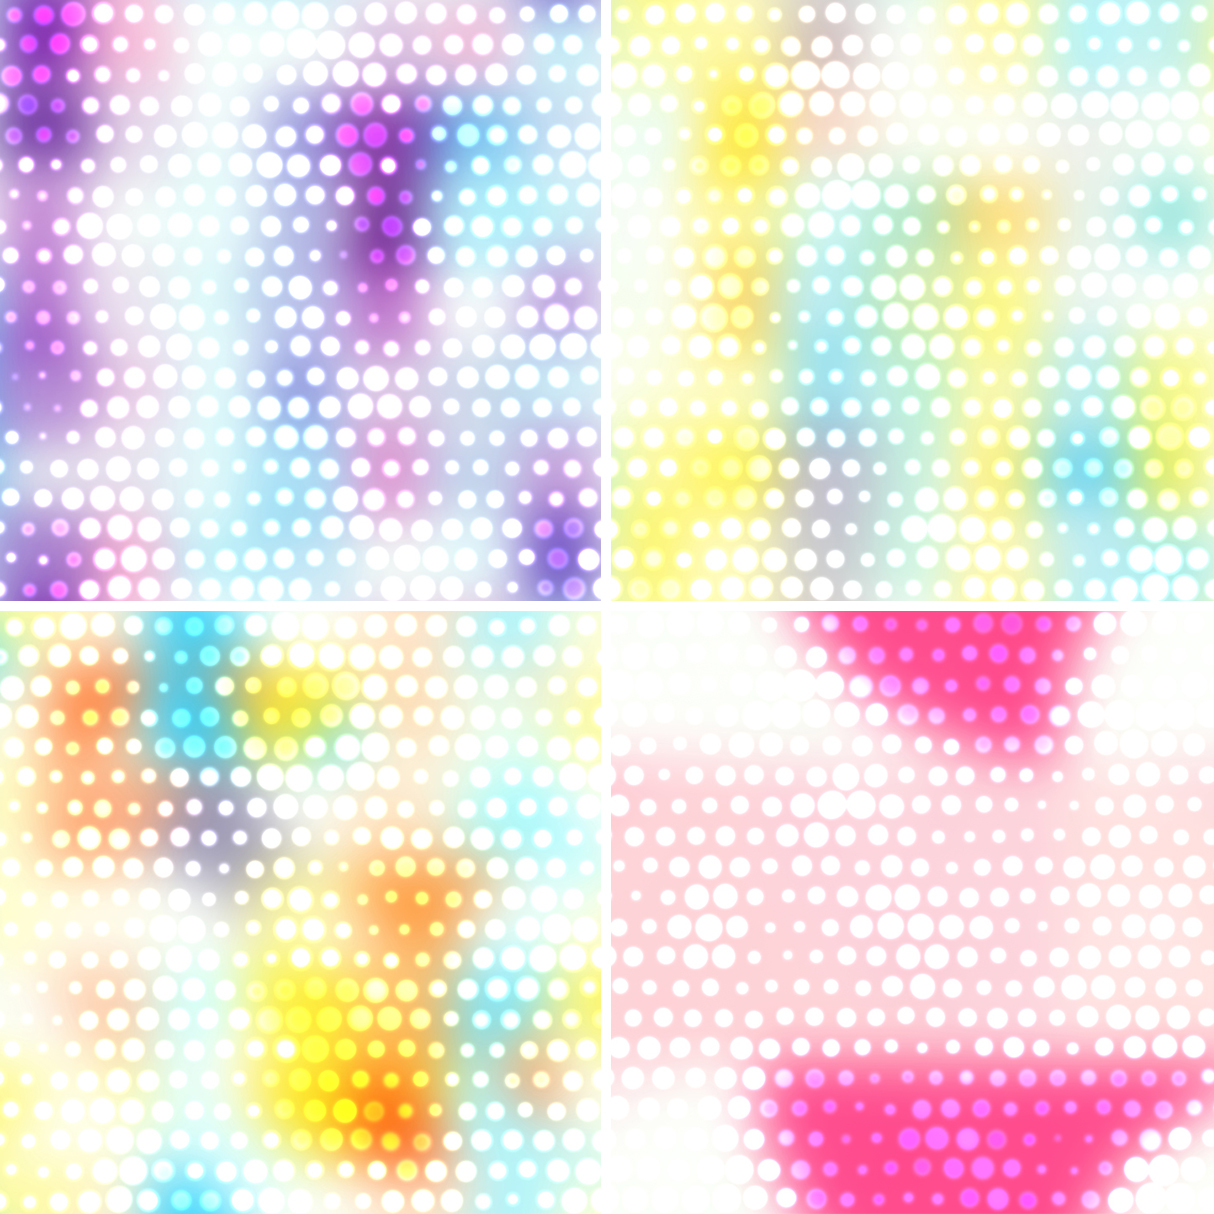 50 Shining Dotty Backgrounds Samples Preview – Part 7